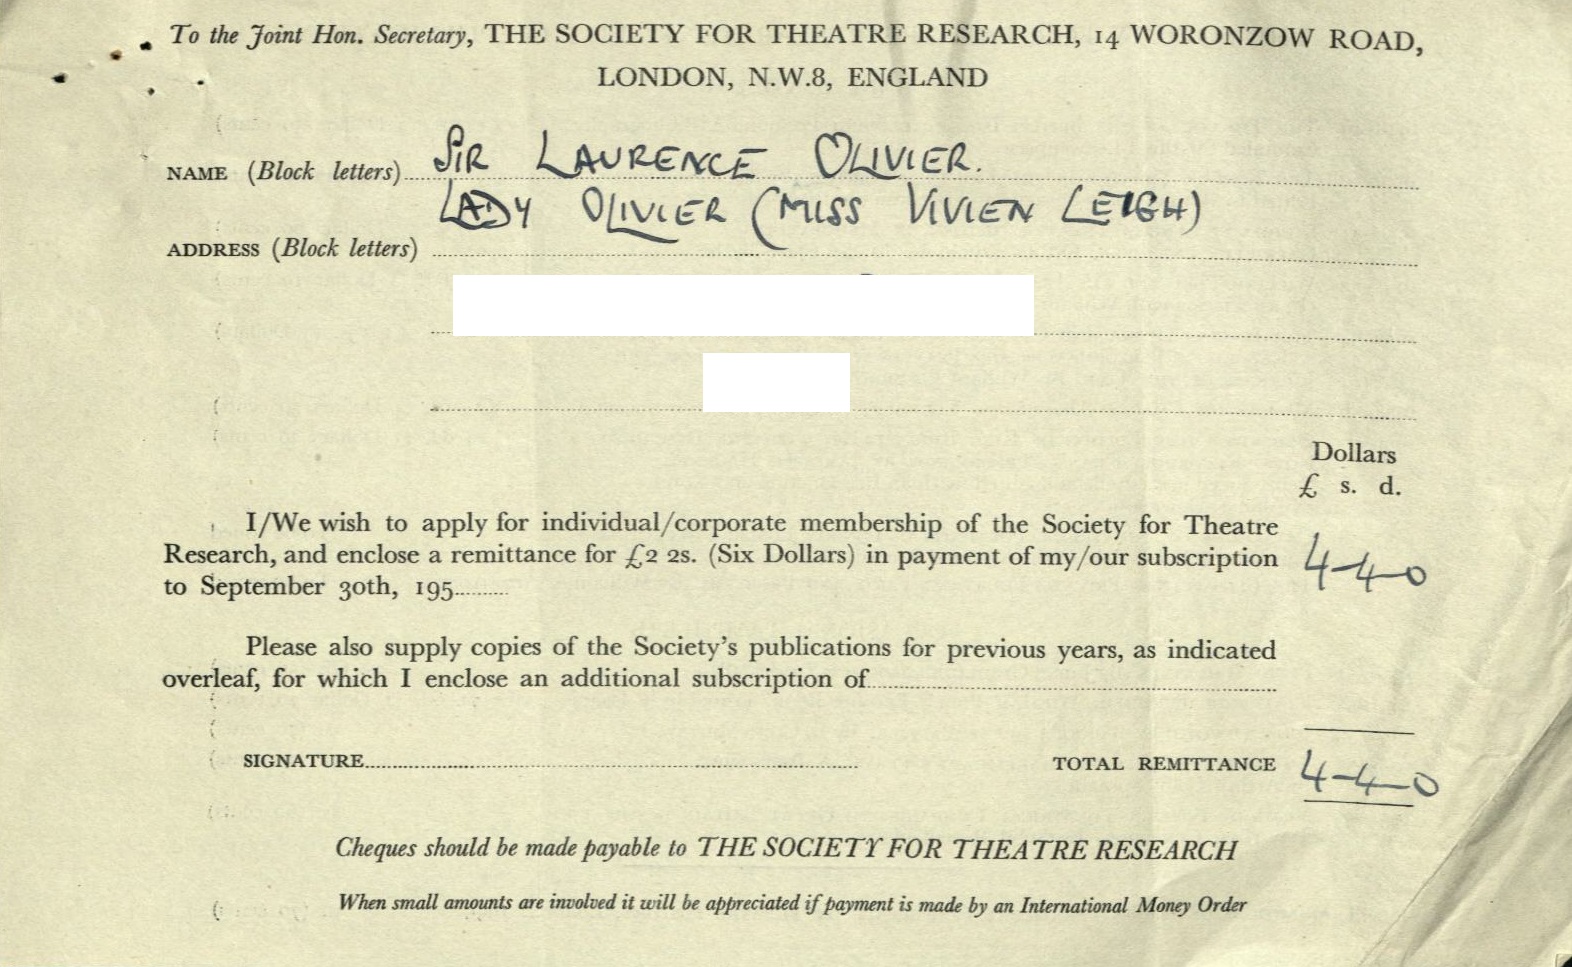 3.Receipt for membership for Lord and Lady Olivier, 1958, Society for Theatre Research archive [THM/472]